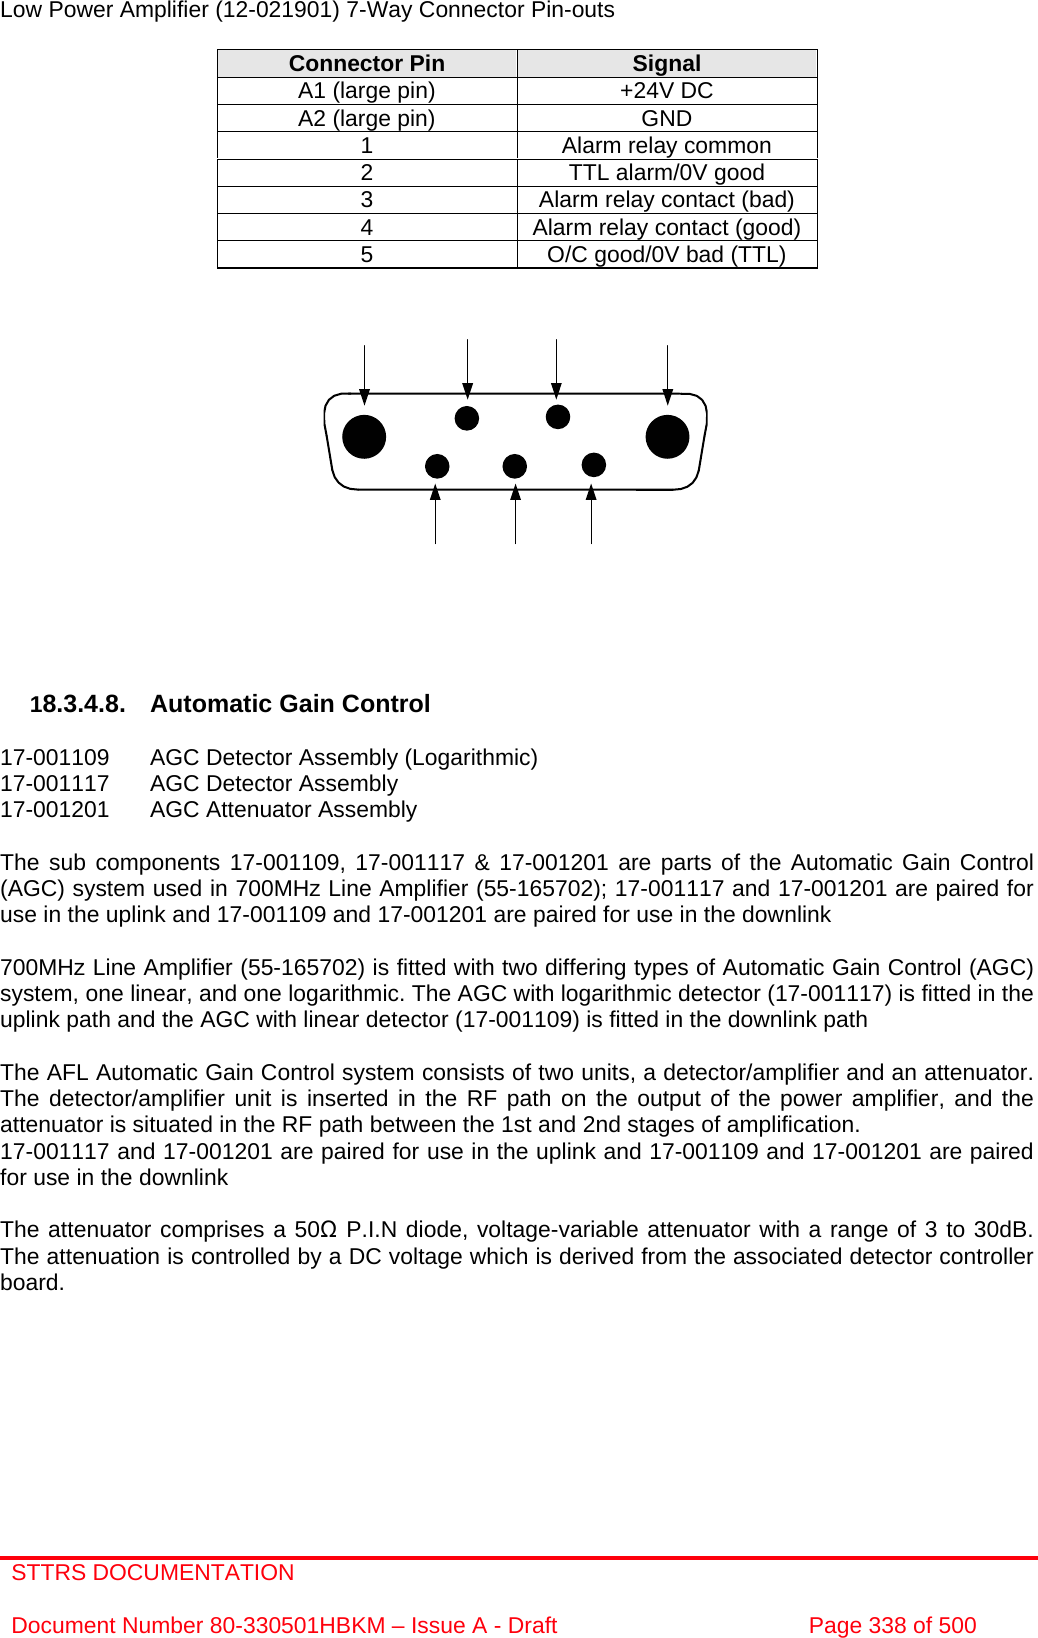 STTRS DOCUMENTATION  Document Number 80-330501HBKM – Issue A - Draft  Page 338 of 500   Low Power Amplifier (12-021901) 7-Way Connector Pin-outs  Connector Pin  Signal A1 (large pin)  +24V DC A2 (large pin)  GND 1  Alarm relay common 2  TTL alarm/0V good 3  Alarm relay contact (bad) 4  Alarm relay contact (good) 5  O/C good/0V bad (TTL)                 18.3.4.8.  Automatic Gain Control  17-001109  AGC Detector Assembly (Logarithmic) 17-001117  AGC Detector Assembly  17-001201  AGC Attenuator Assembly   The sub components 17-001109, 17-001117 &amp; 17-001201 are parts of the Automatic Gain Control (AGC) system used in 700MHz Line Amplifier (55-165702); 17-001117 and 17-001201 are paired for use in the uplink and 17-001109 and 17-001201 are paired for use in the downlink  700MHz Line Amplifier (55-165702) is fitted with two differing types of Automatic Gain Control (AGC) system, one linear, and one logarithmic. The AGC with logarithmic detector (17-001117) is fitted in the uplink path and the AGC with linear detector (17-001109) is fitted in the downlink path   The AFL Automatic Gain Control system consists of two units, a detector/amplifier and an attenuator. The detector/amplifier unit is inserted in the RF path on the output of the power amplifier, and the attenuator is situated in the RF path between the 1st and 2nd stages of amplification.  17-001117 and 17-001201 are paired for use in the uplink and 17-001109 and 17-001201 are paired for use in the downlink  The attenuator comprises a 50Ω P.I.N diode, voltage-variable attenuator with a range of 3 to 30dB. The attenuation is controlled by a DC voltage which is derived from the associated detector controller board. 